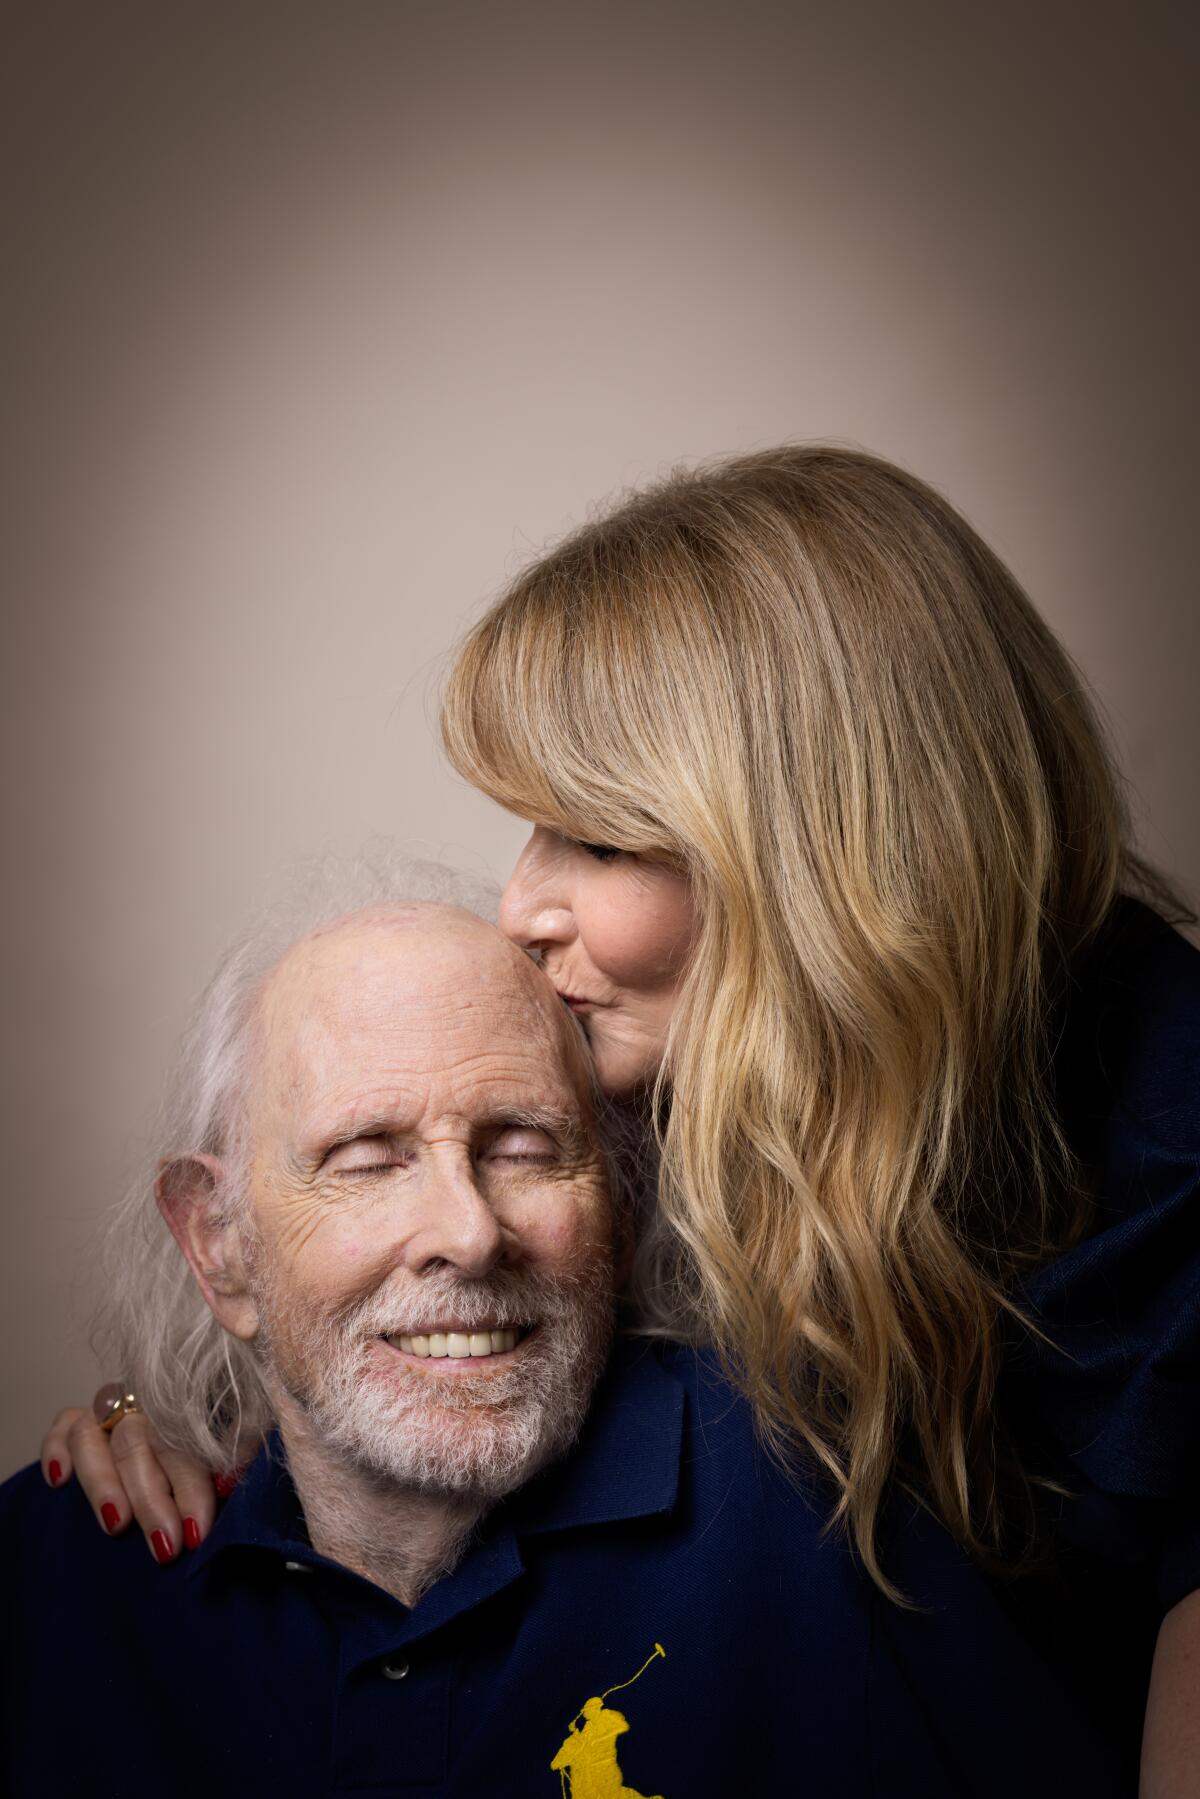 A blond woman kisses the top of the head of an older man with white hair and a white beard.